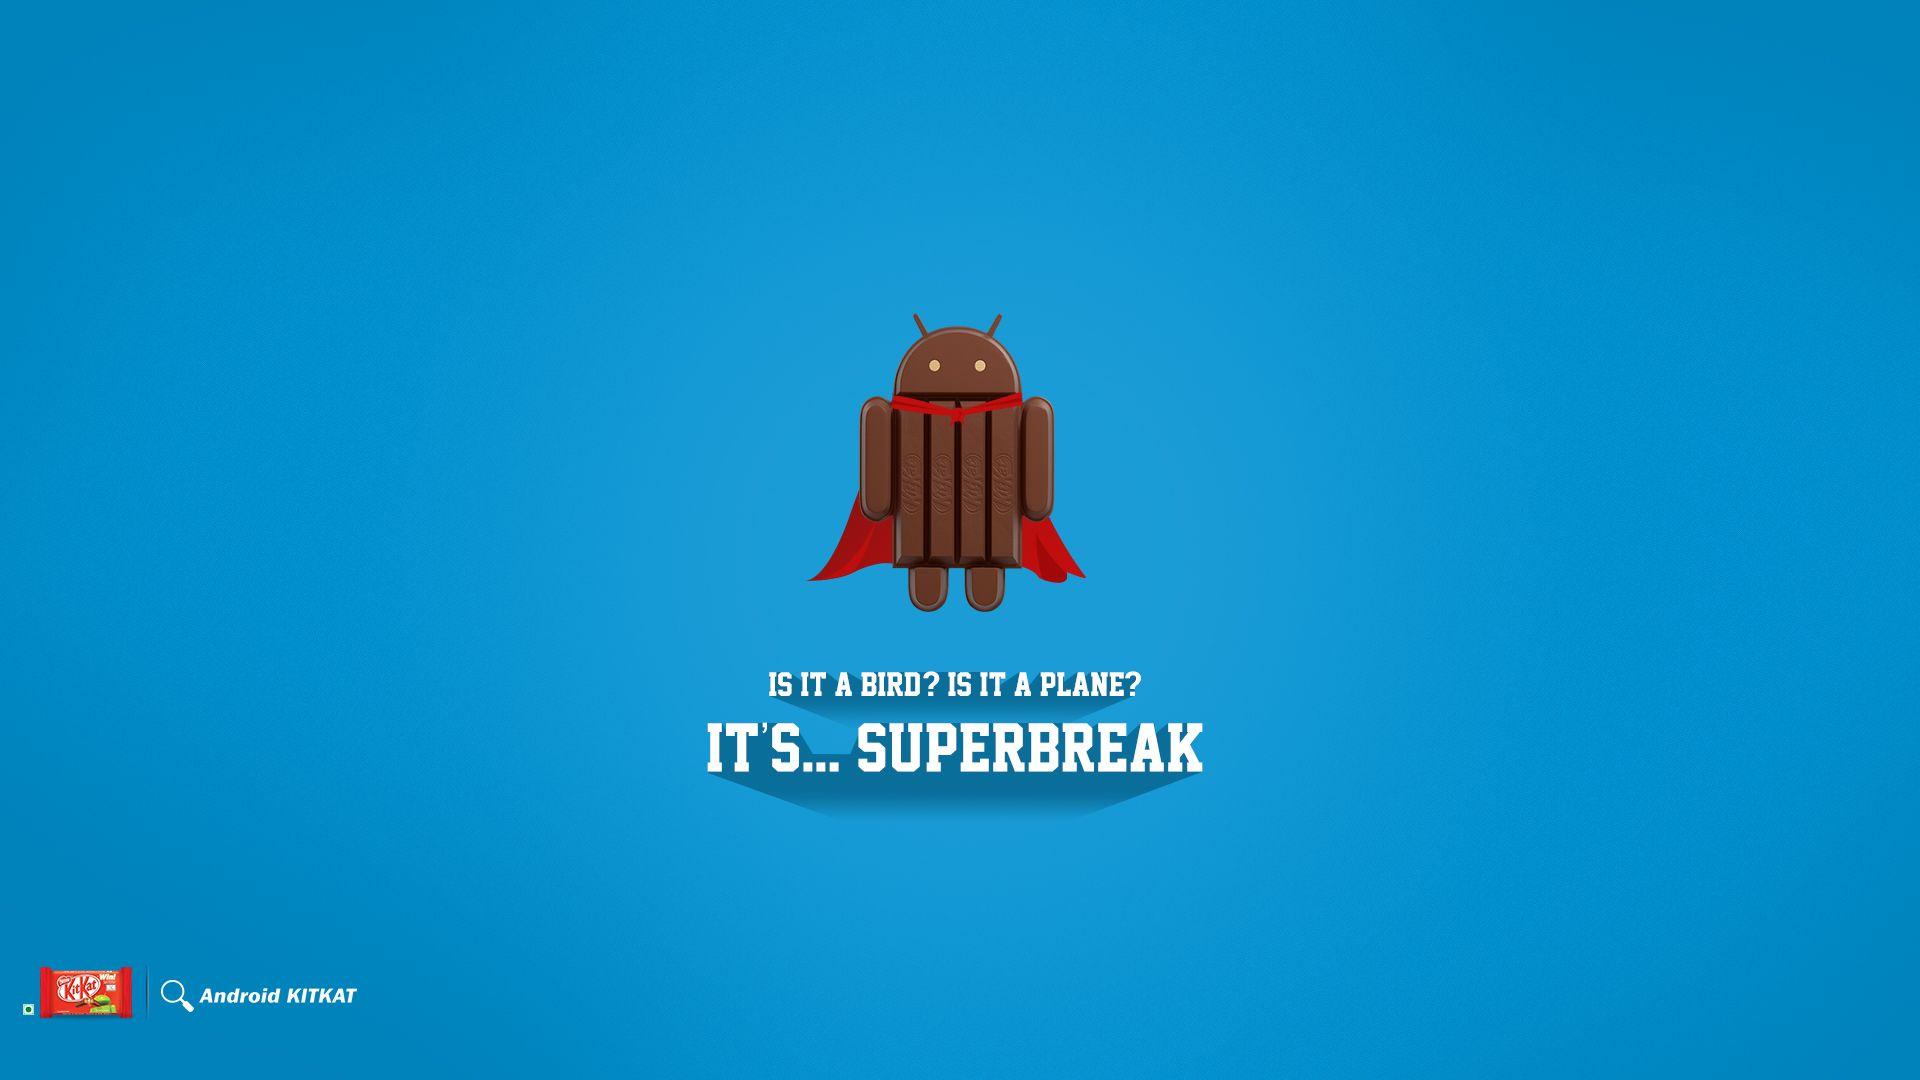 Android 4.4 KitKat Wallpaper. Method of Tried